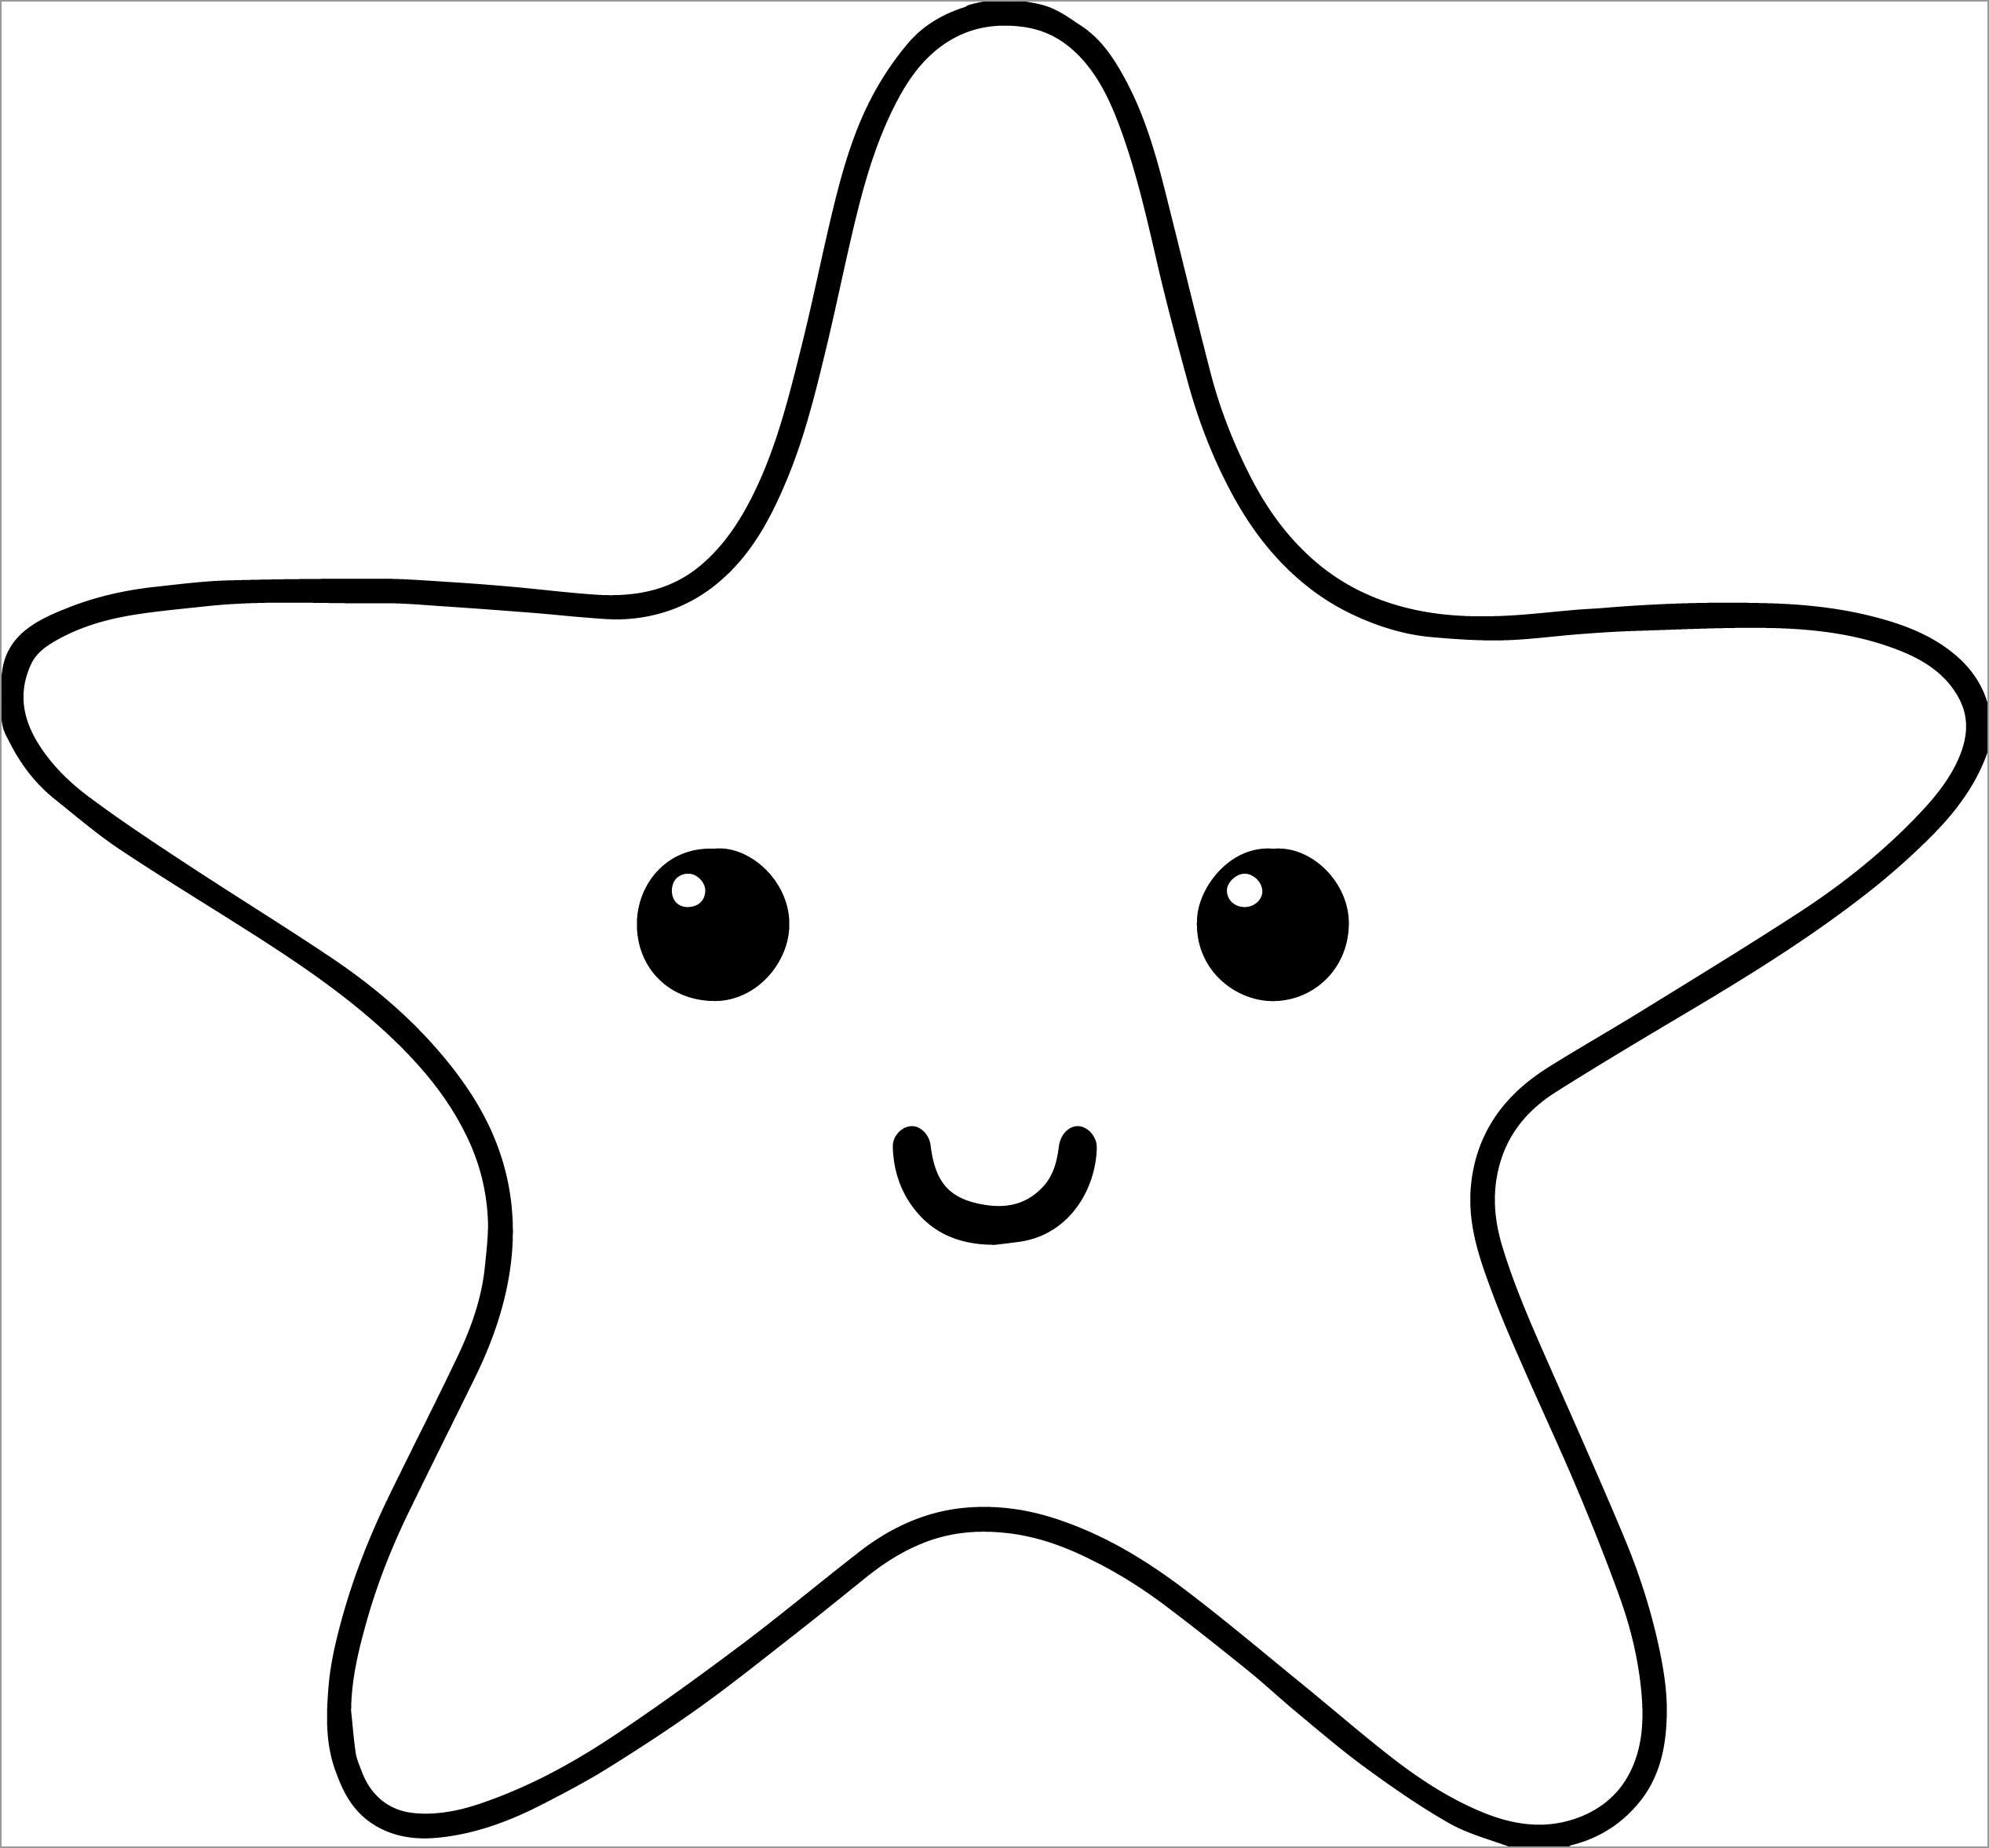 Cute Starfish Coloring Page for Kids